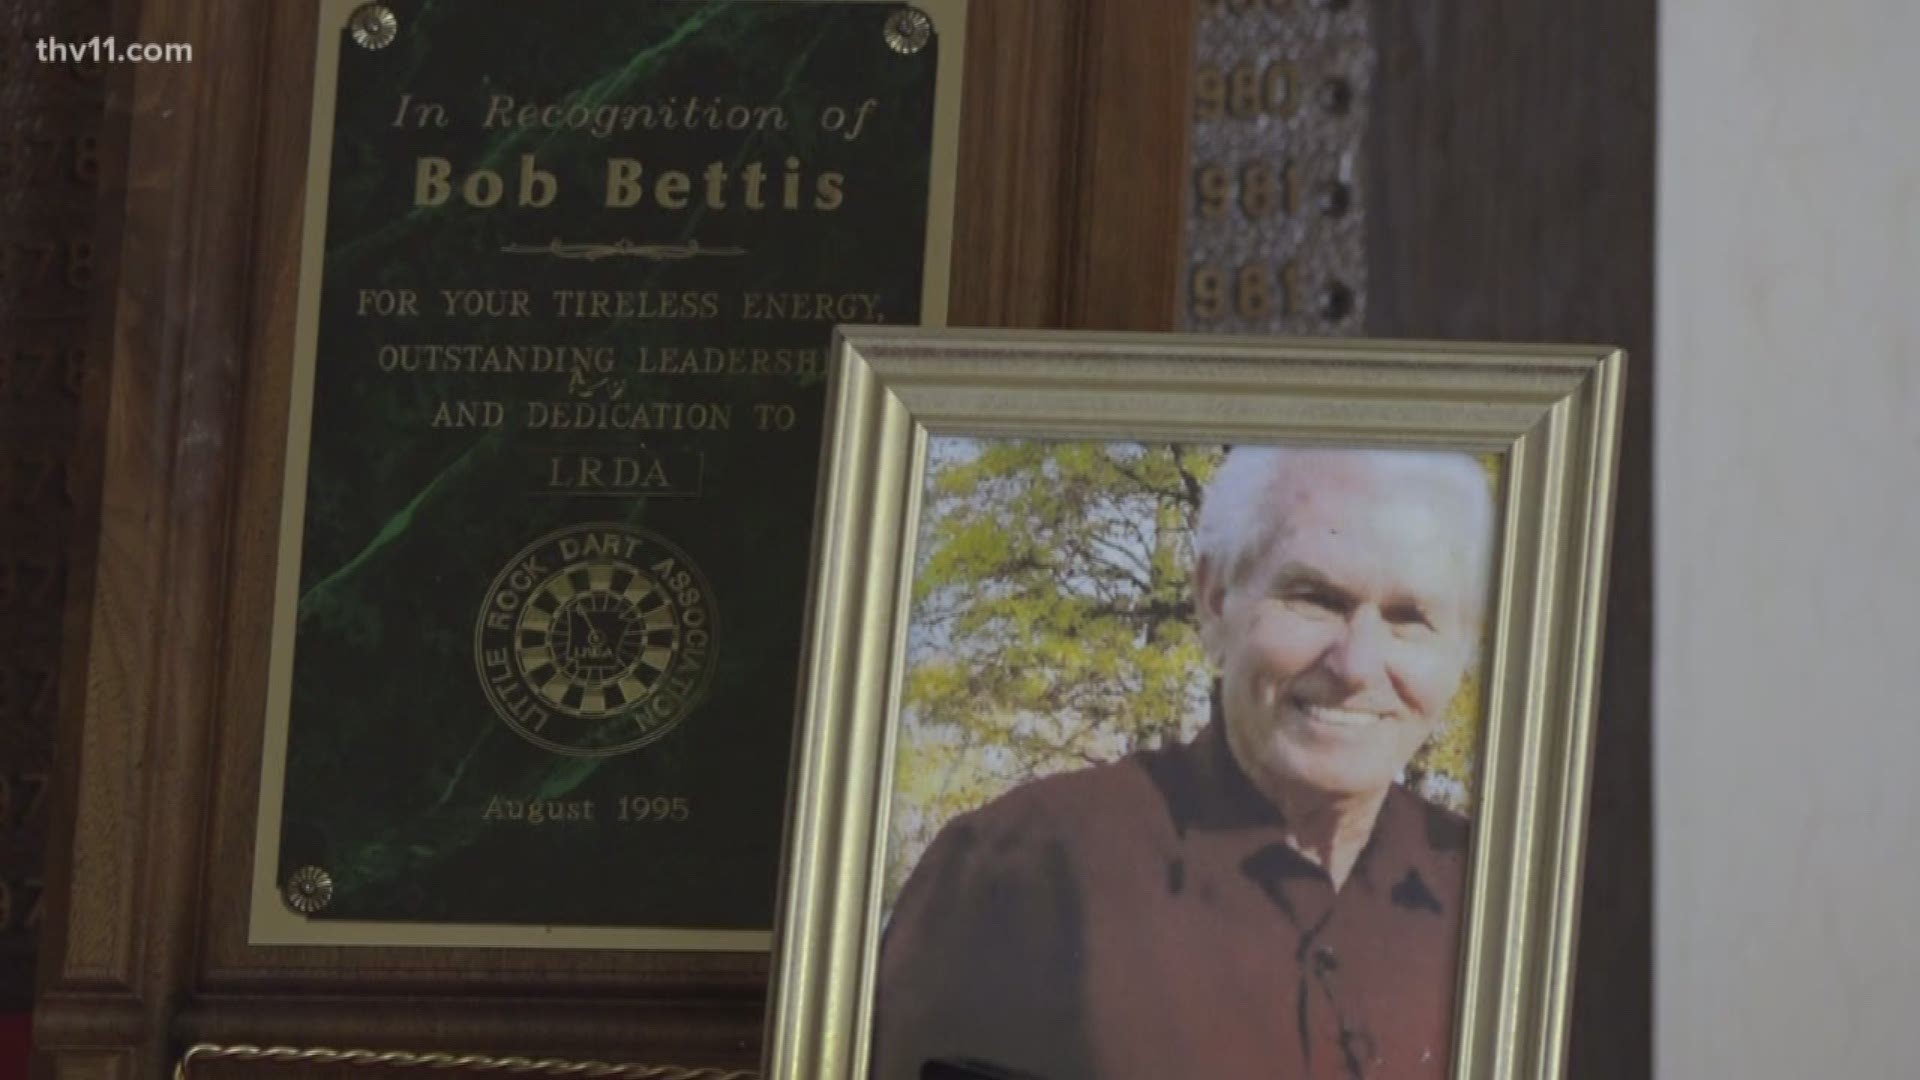 The Arkansas Dart Association held the 5th annual Bob Bettis Classic, which drew more than 100 players from across the state